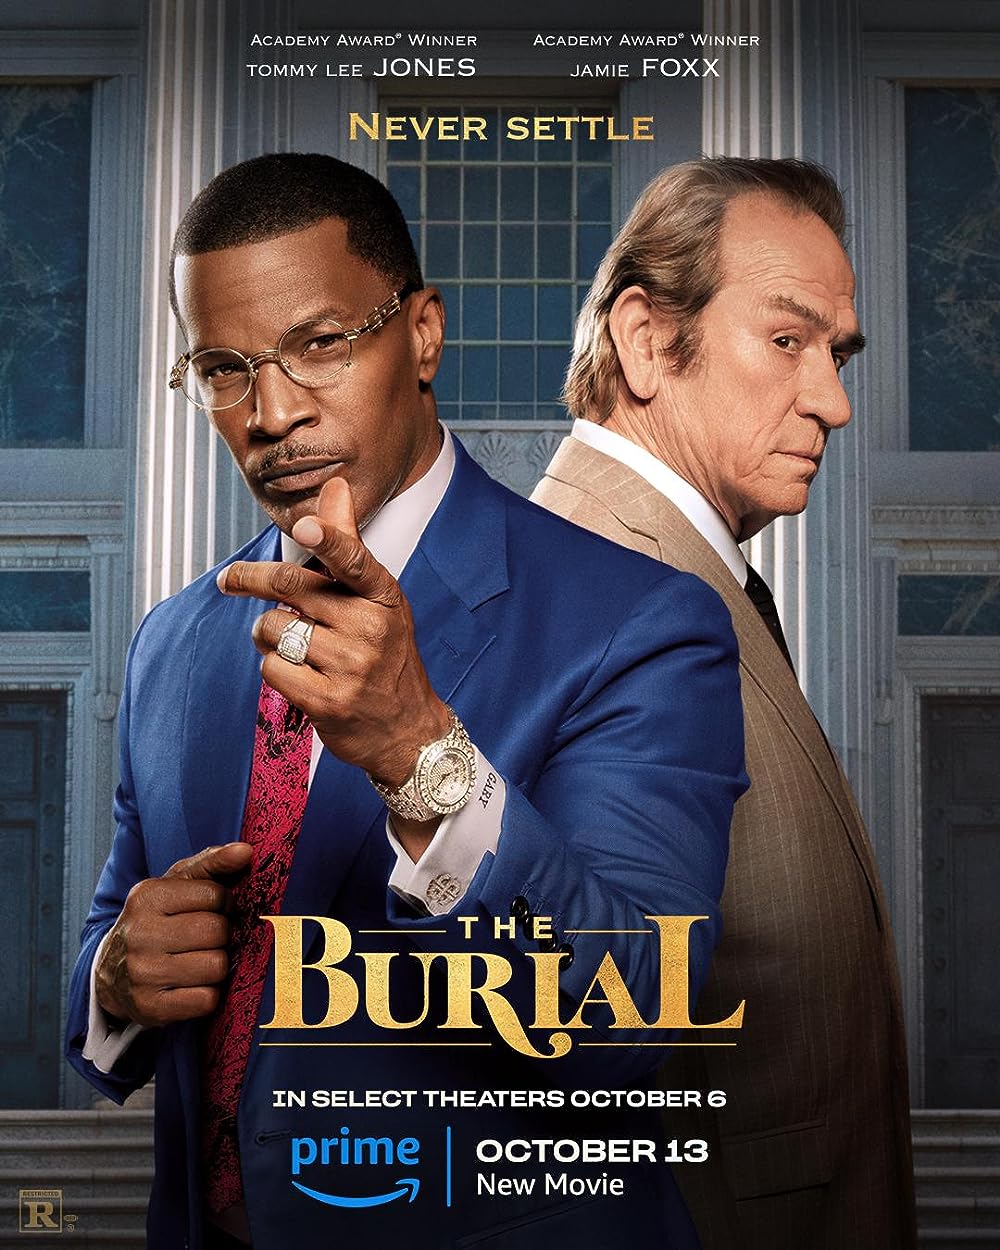 The Burial (October 13) - Streaming on Prime Video
The Burial is a gripping drama inspired by real events. When a simple handshake agreement takes a bitter turn, Jeremiah O'Keefe finds himself in dire straits as a funeral home owner.